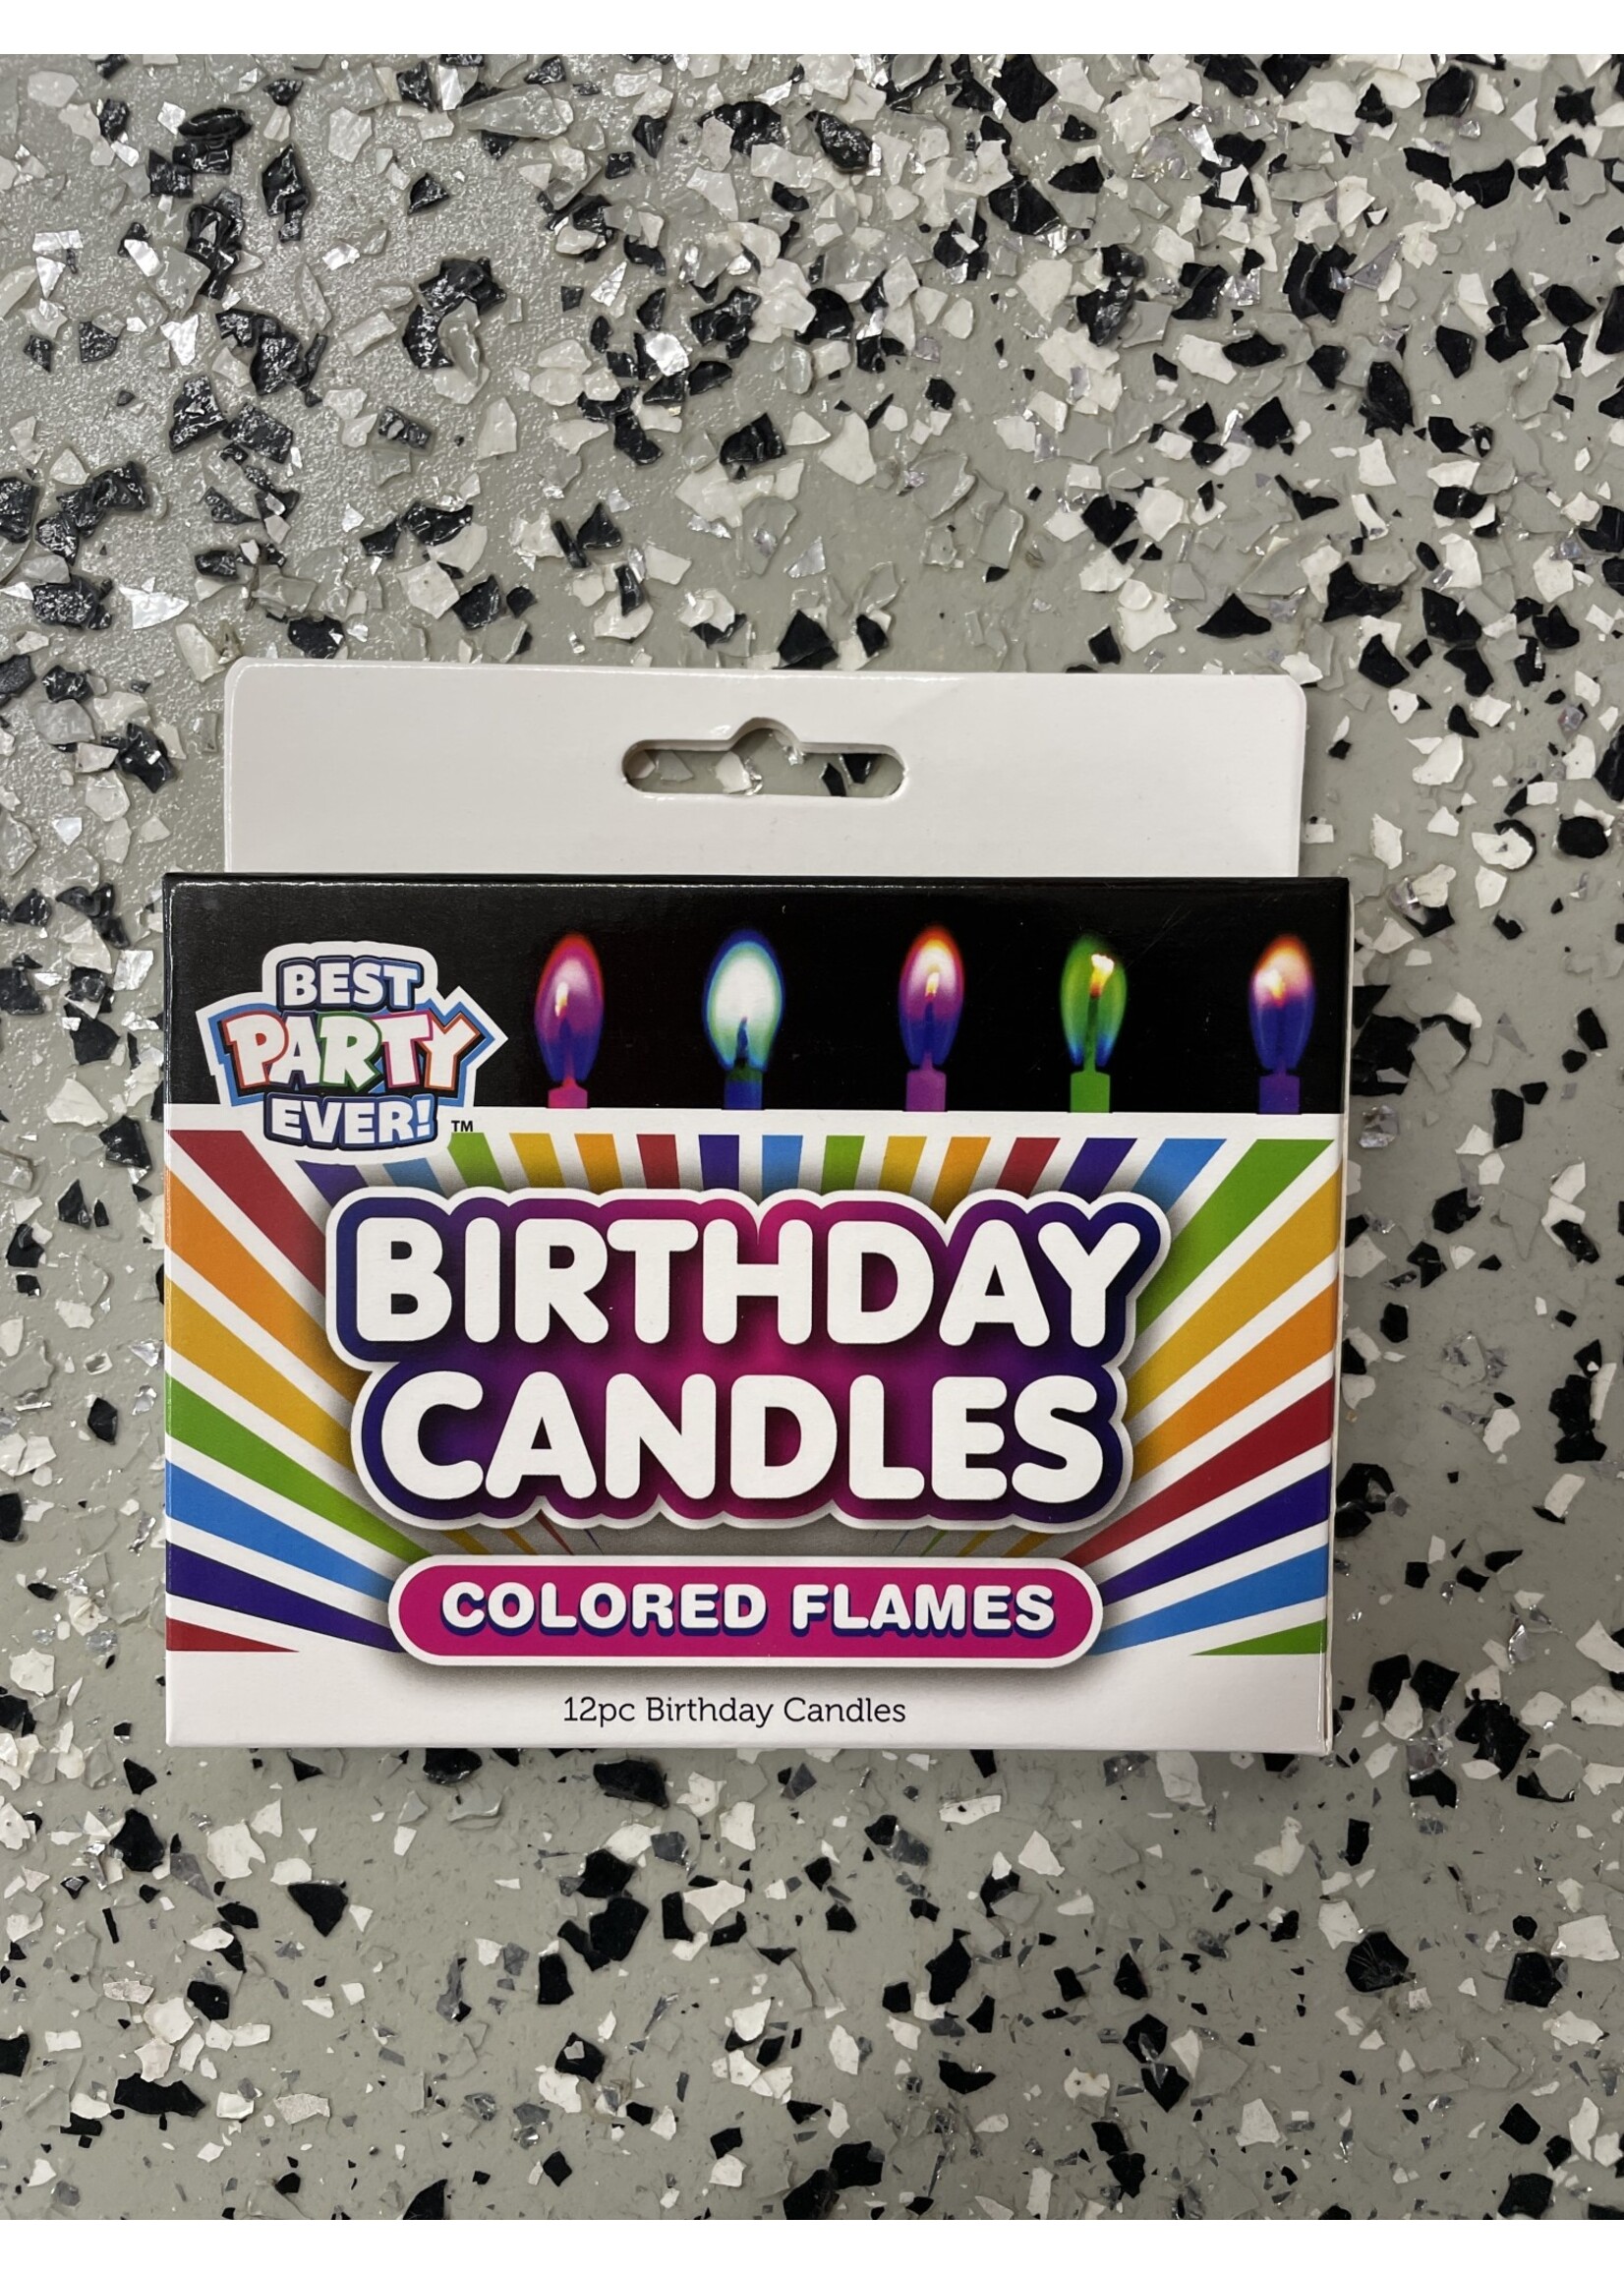 Birthday candles - Colored Flames